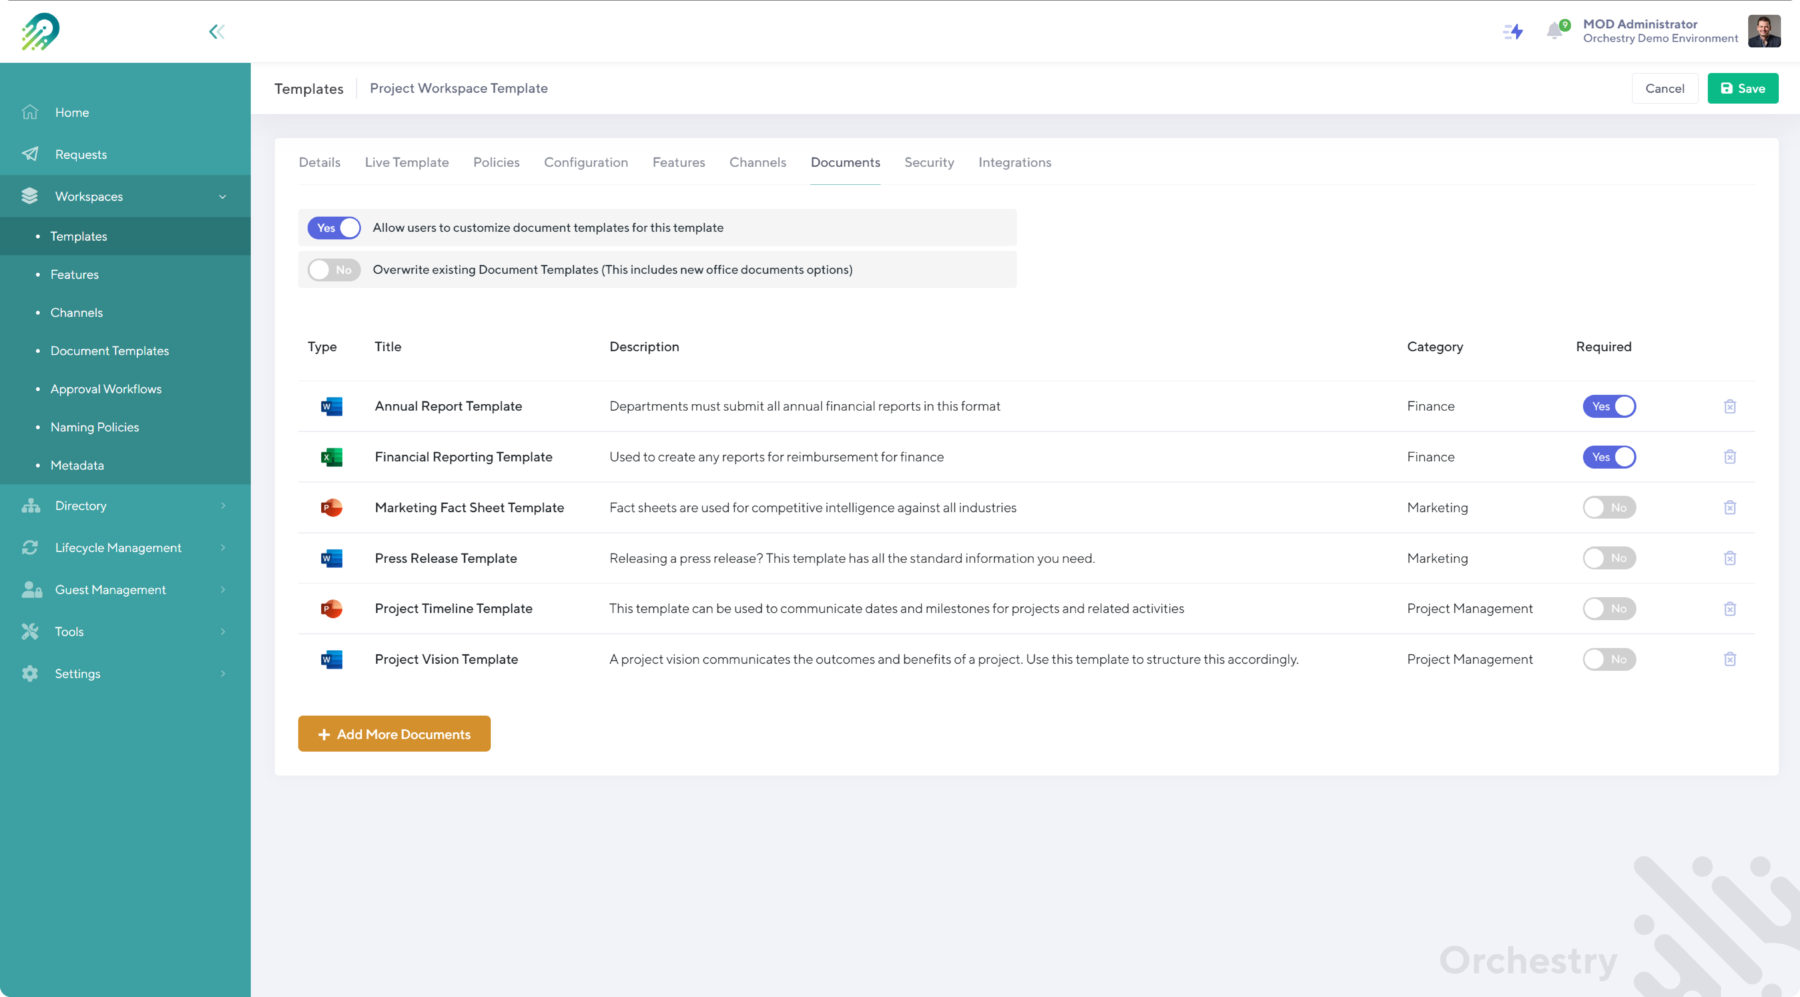 Orchestry's Microsoft Teams workspace template document configuration